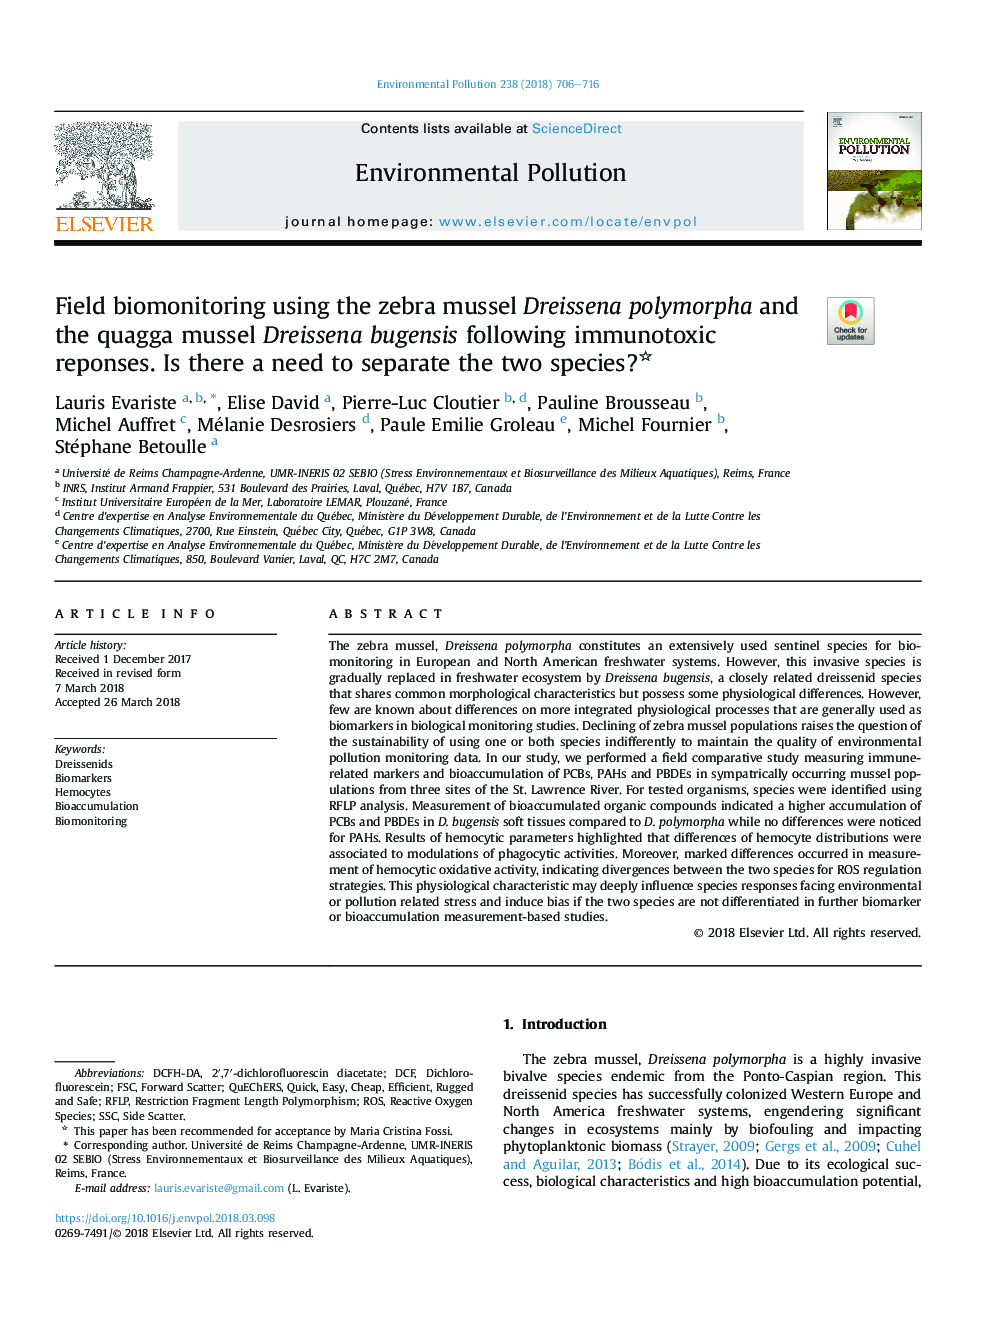 Field biomonitoring using the zebra mussel Dreissena polymorpha and the quagga mussel Dreissena bugensis following immunotoxic reponses. Is there a need to separate the two species?